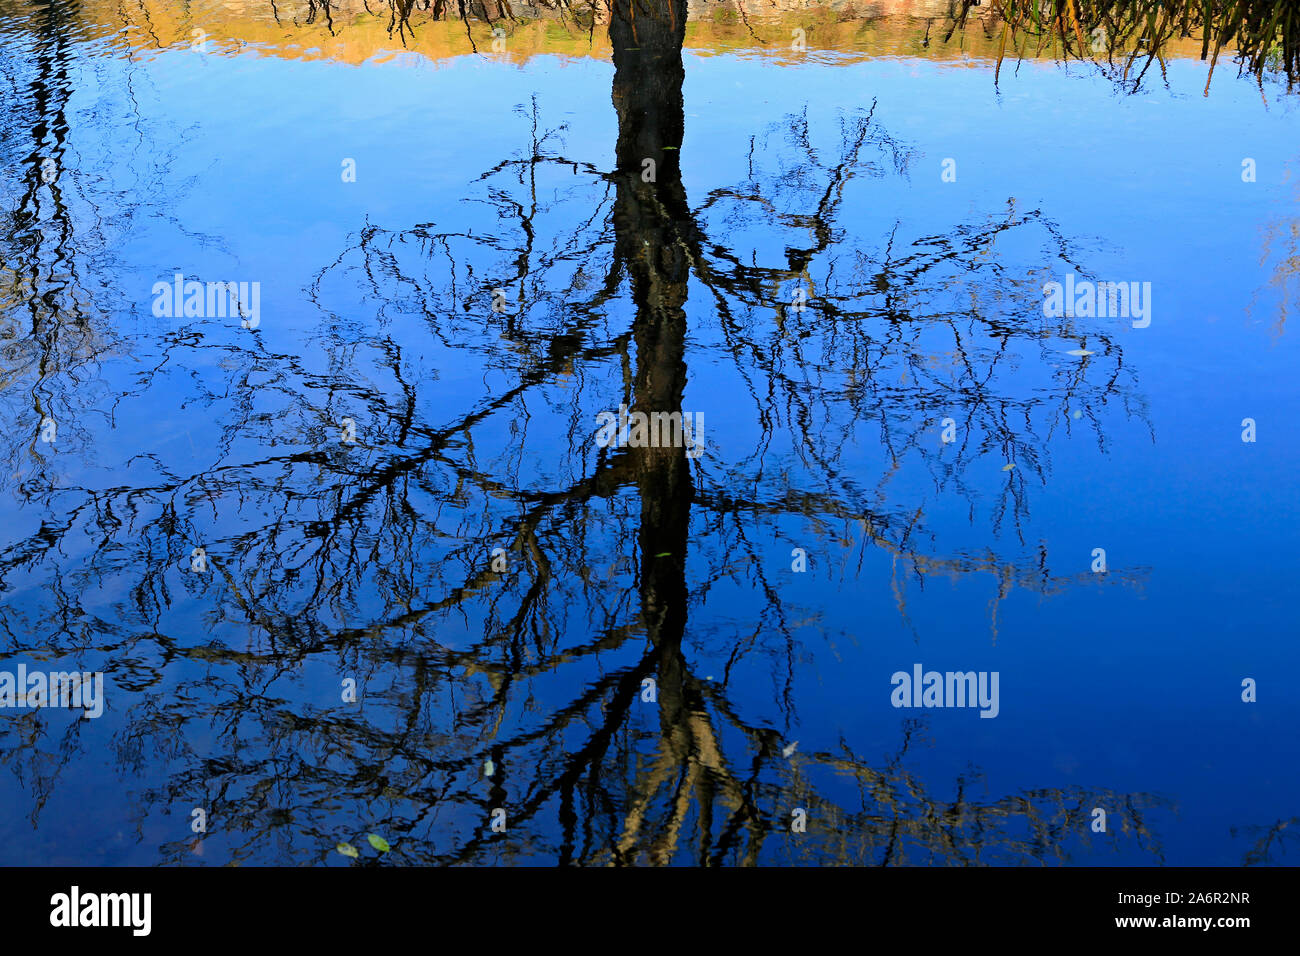 Nature's mirror. Tree without leaves mirrored on the surface of a blue pond in late autumn. Stock Photo